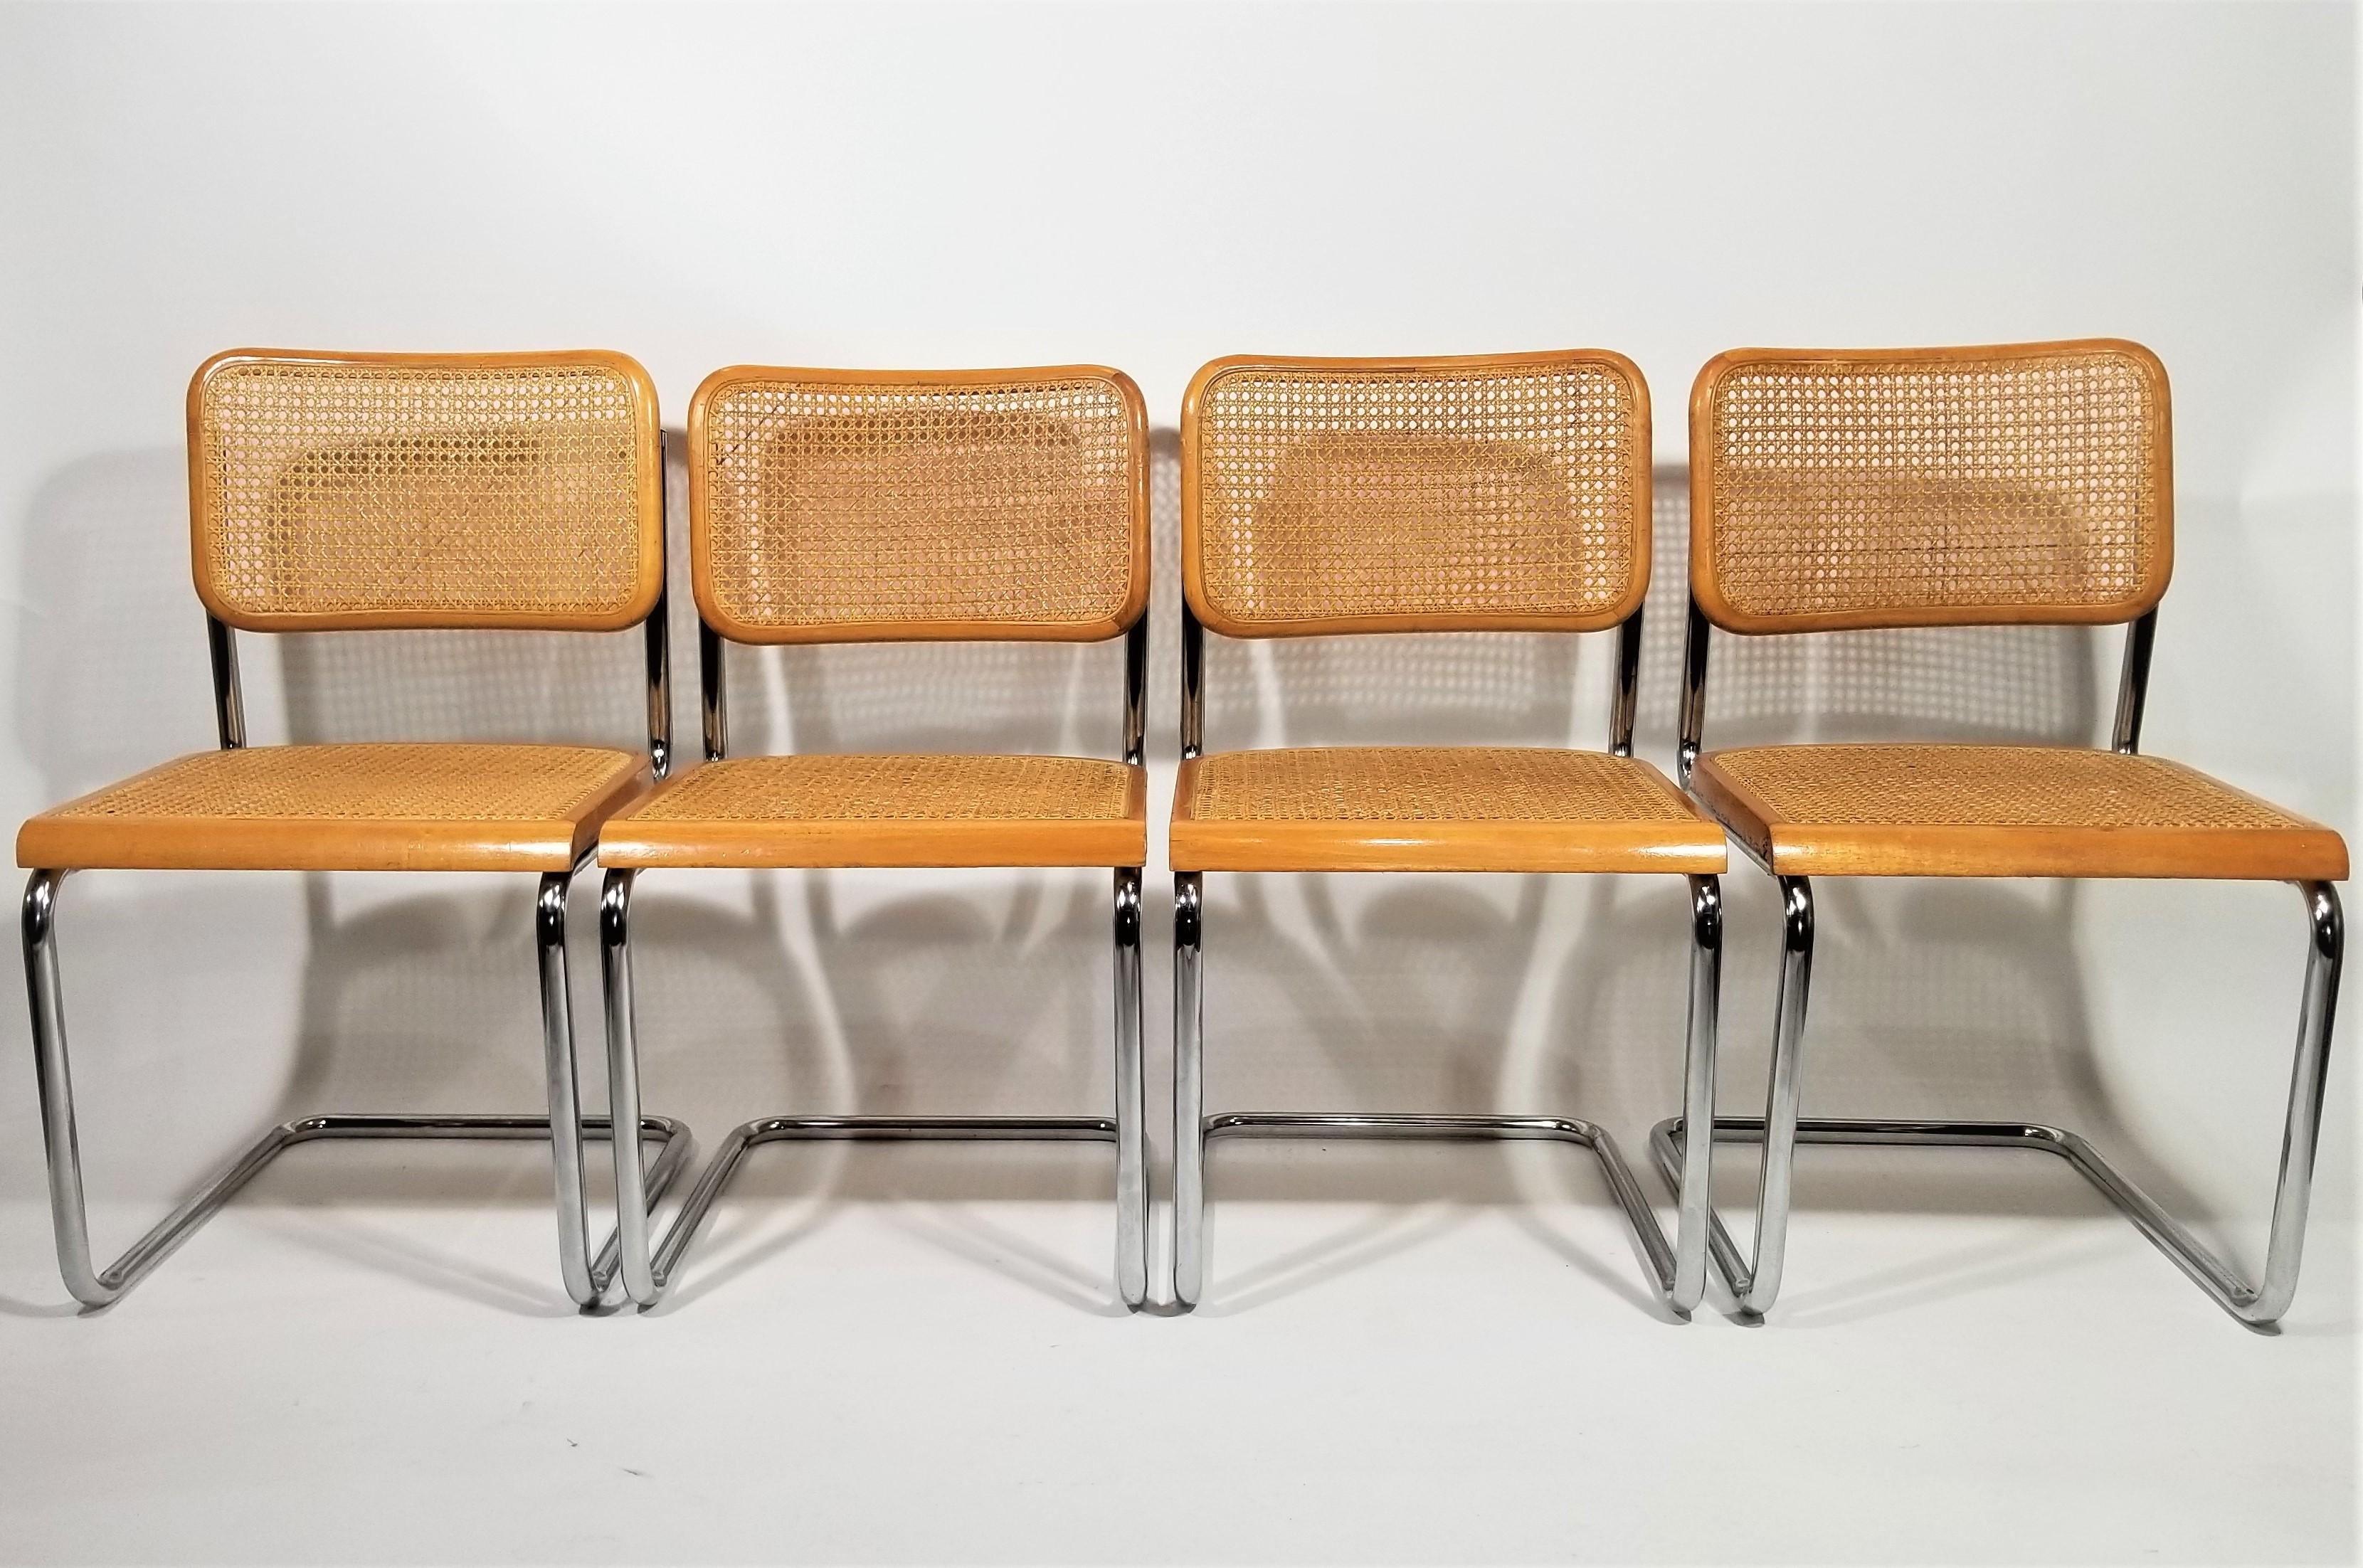  Marcel Breuer Cesca Chairs Mid Century Set of 4 For Sale 13